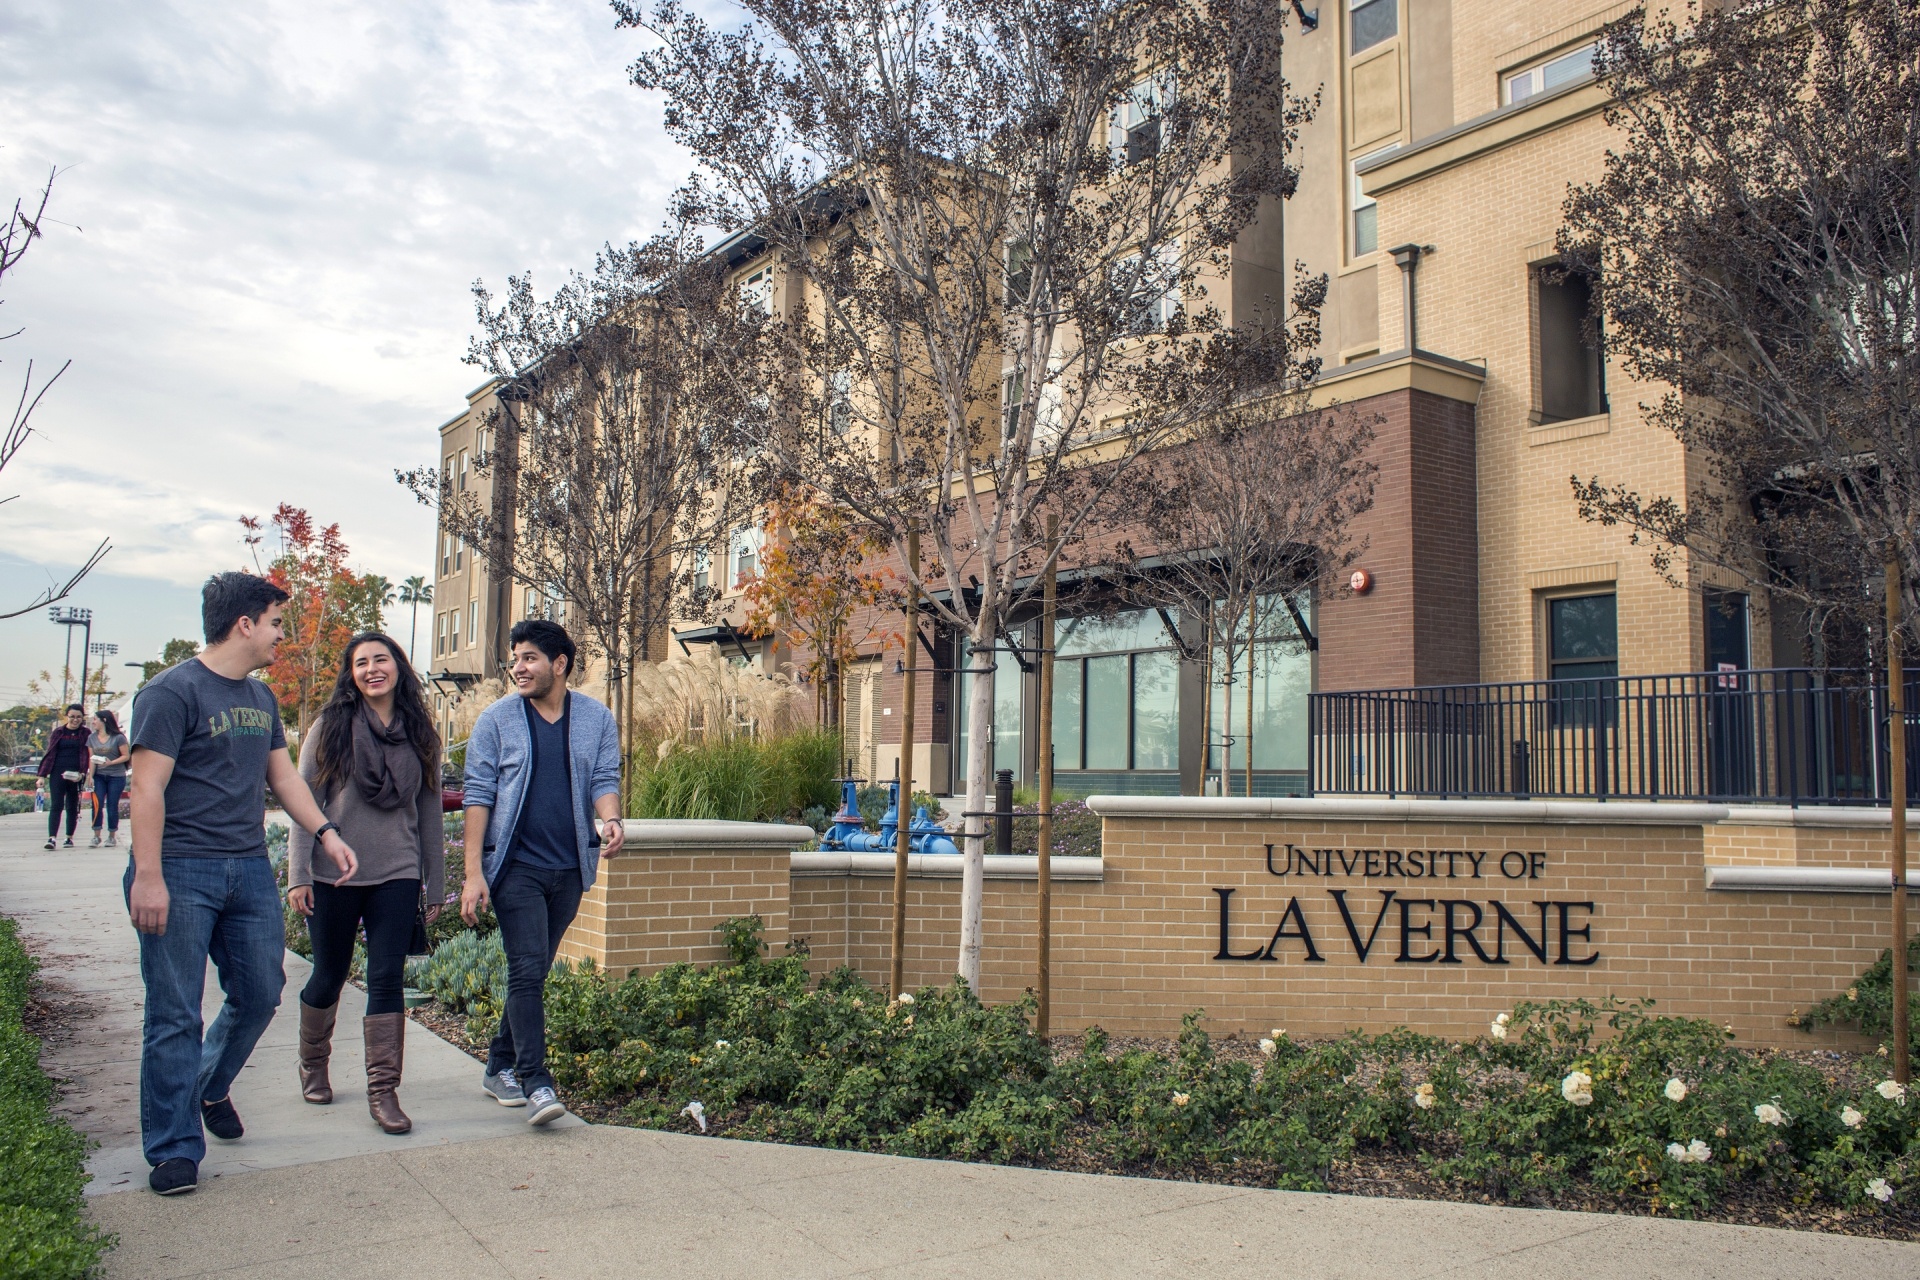 No Tuition Raise for Most University of La Verne Programs in 2021-22